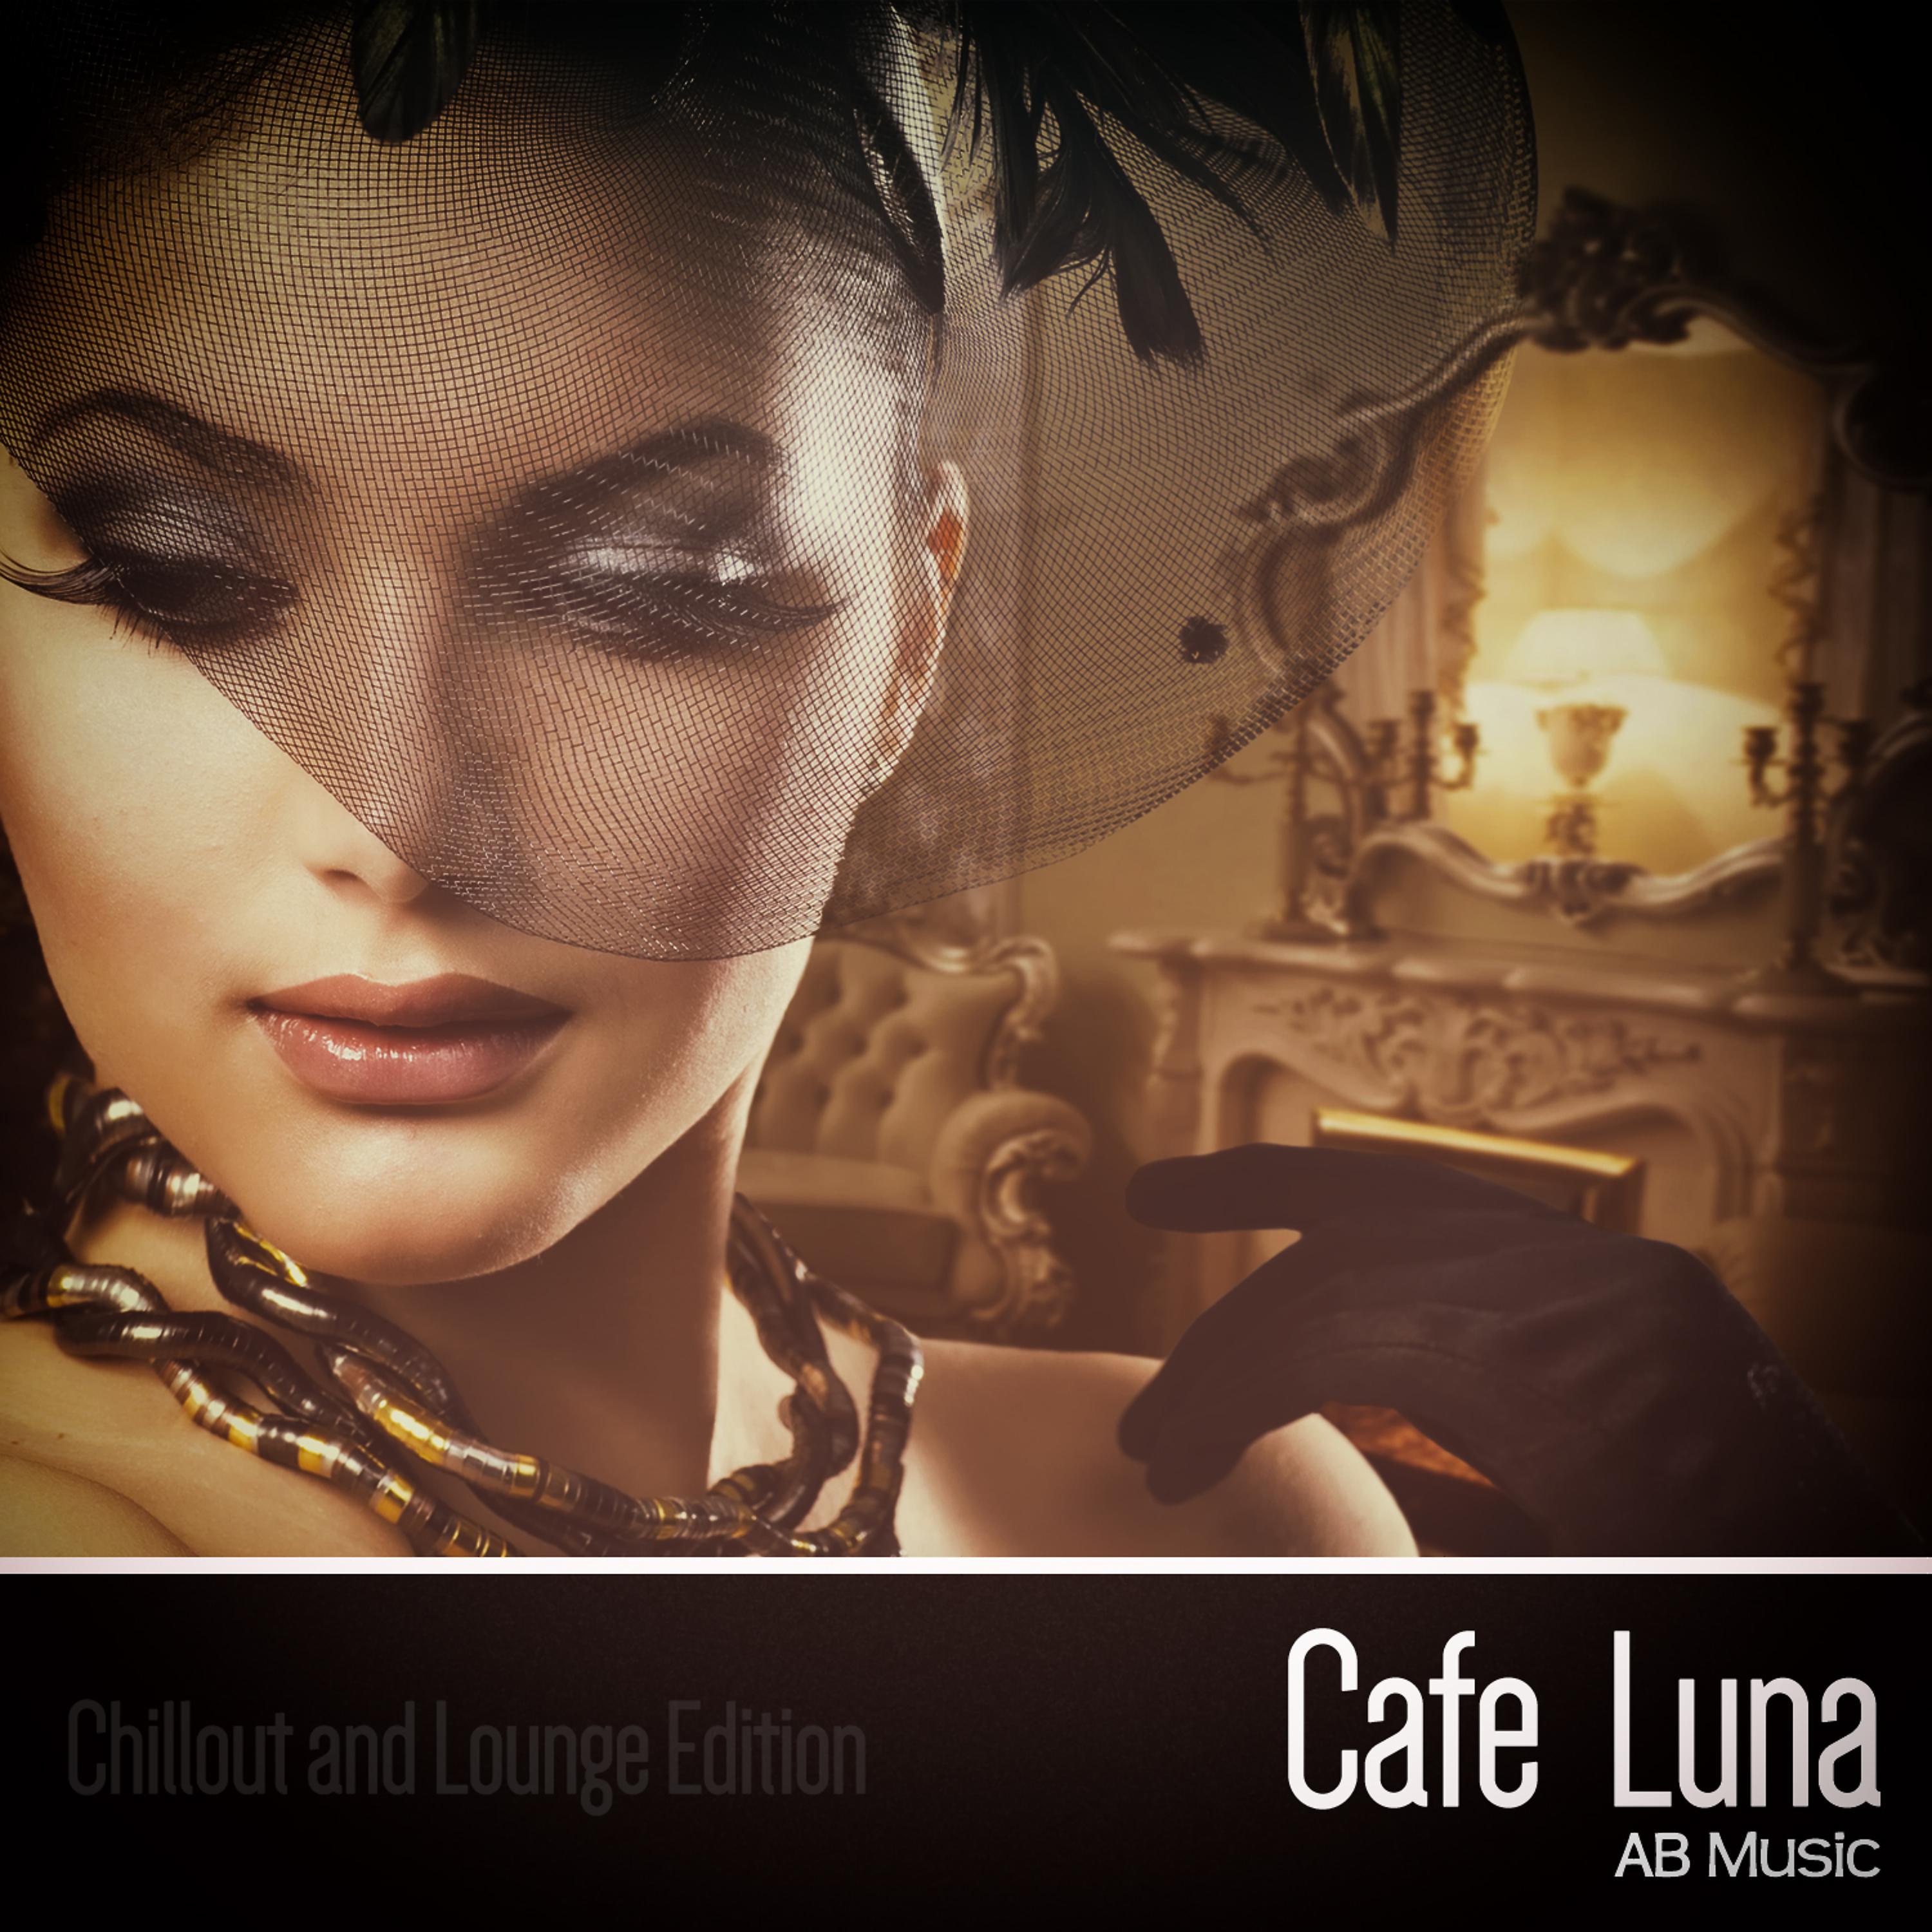 Постер альбома Cafe Luna (Chillout and Lounge Edition)